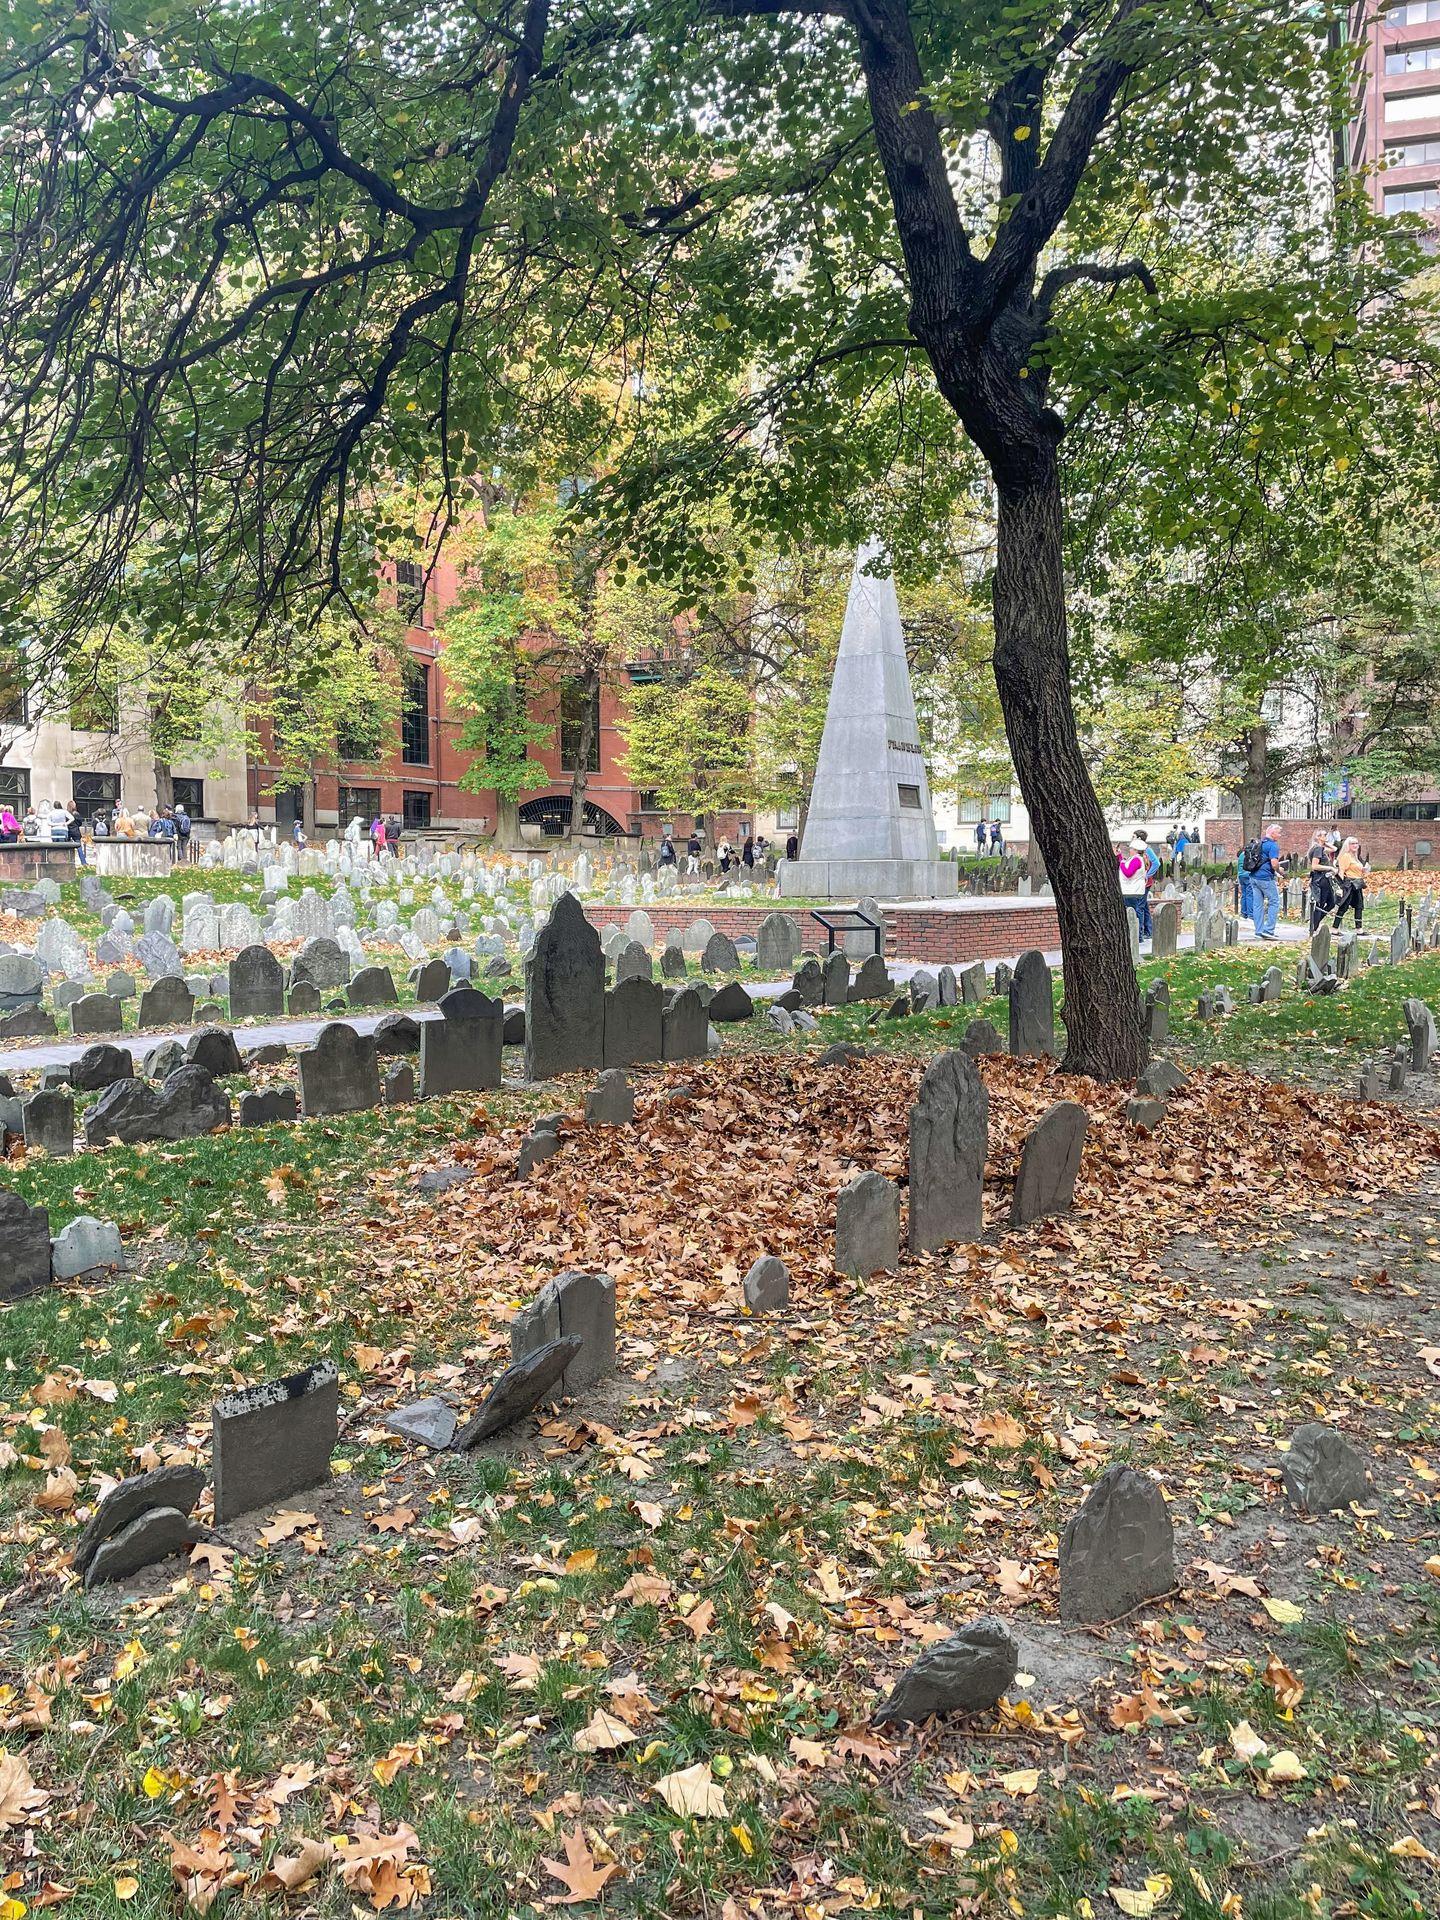 A few rows of old graves in the Granbury Burying Ground.